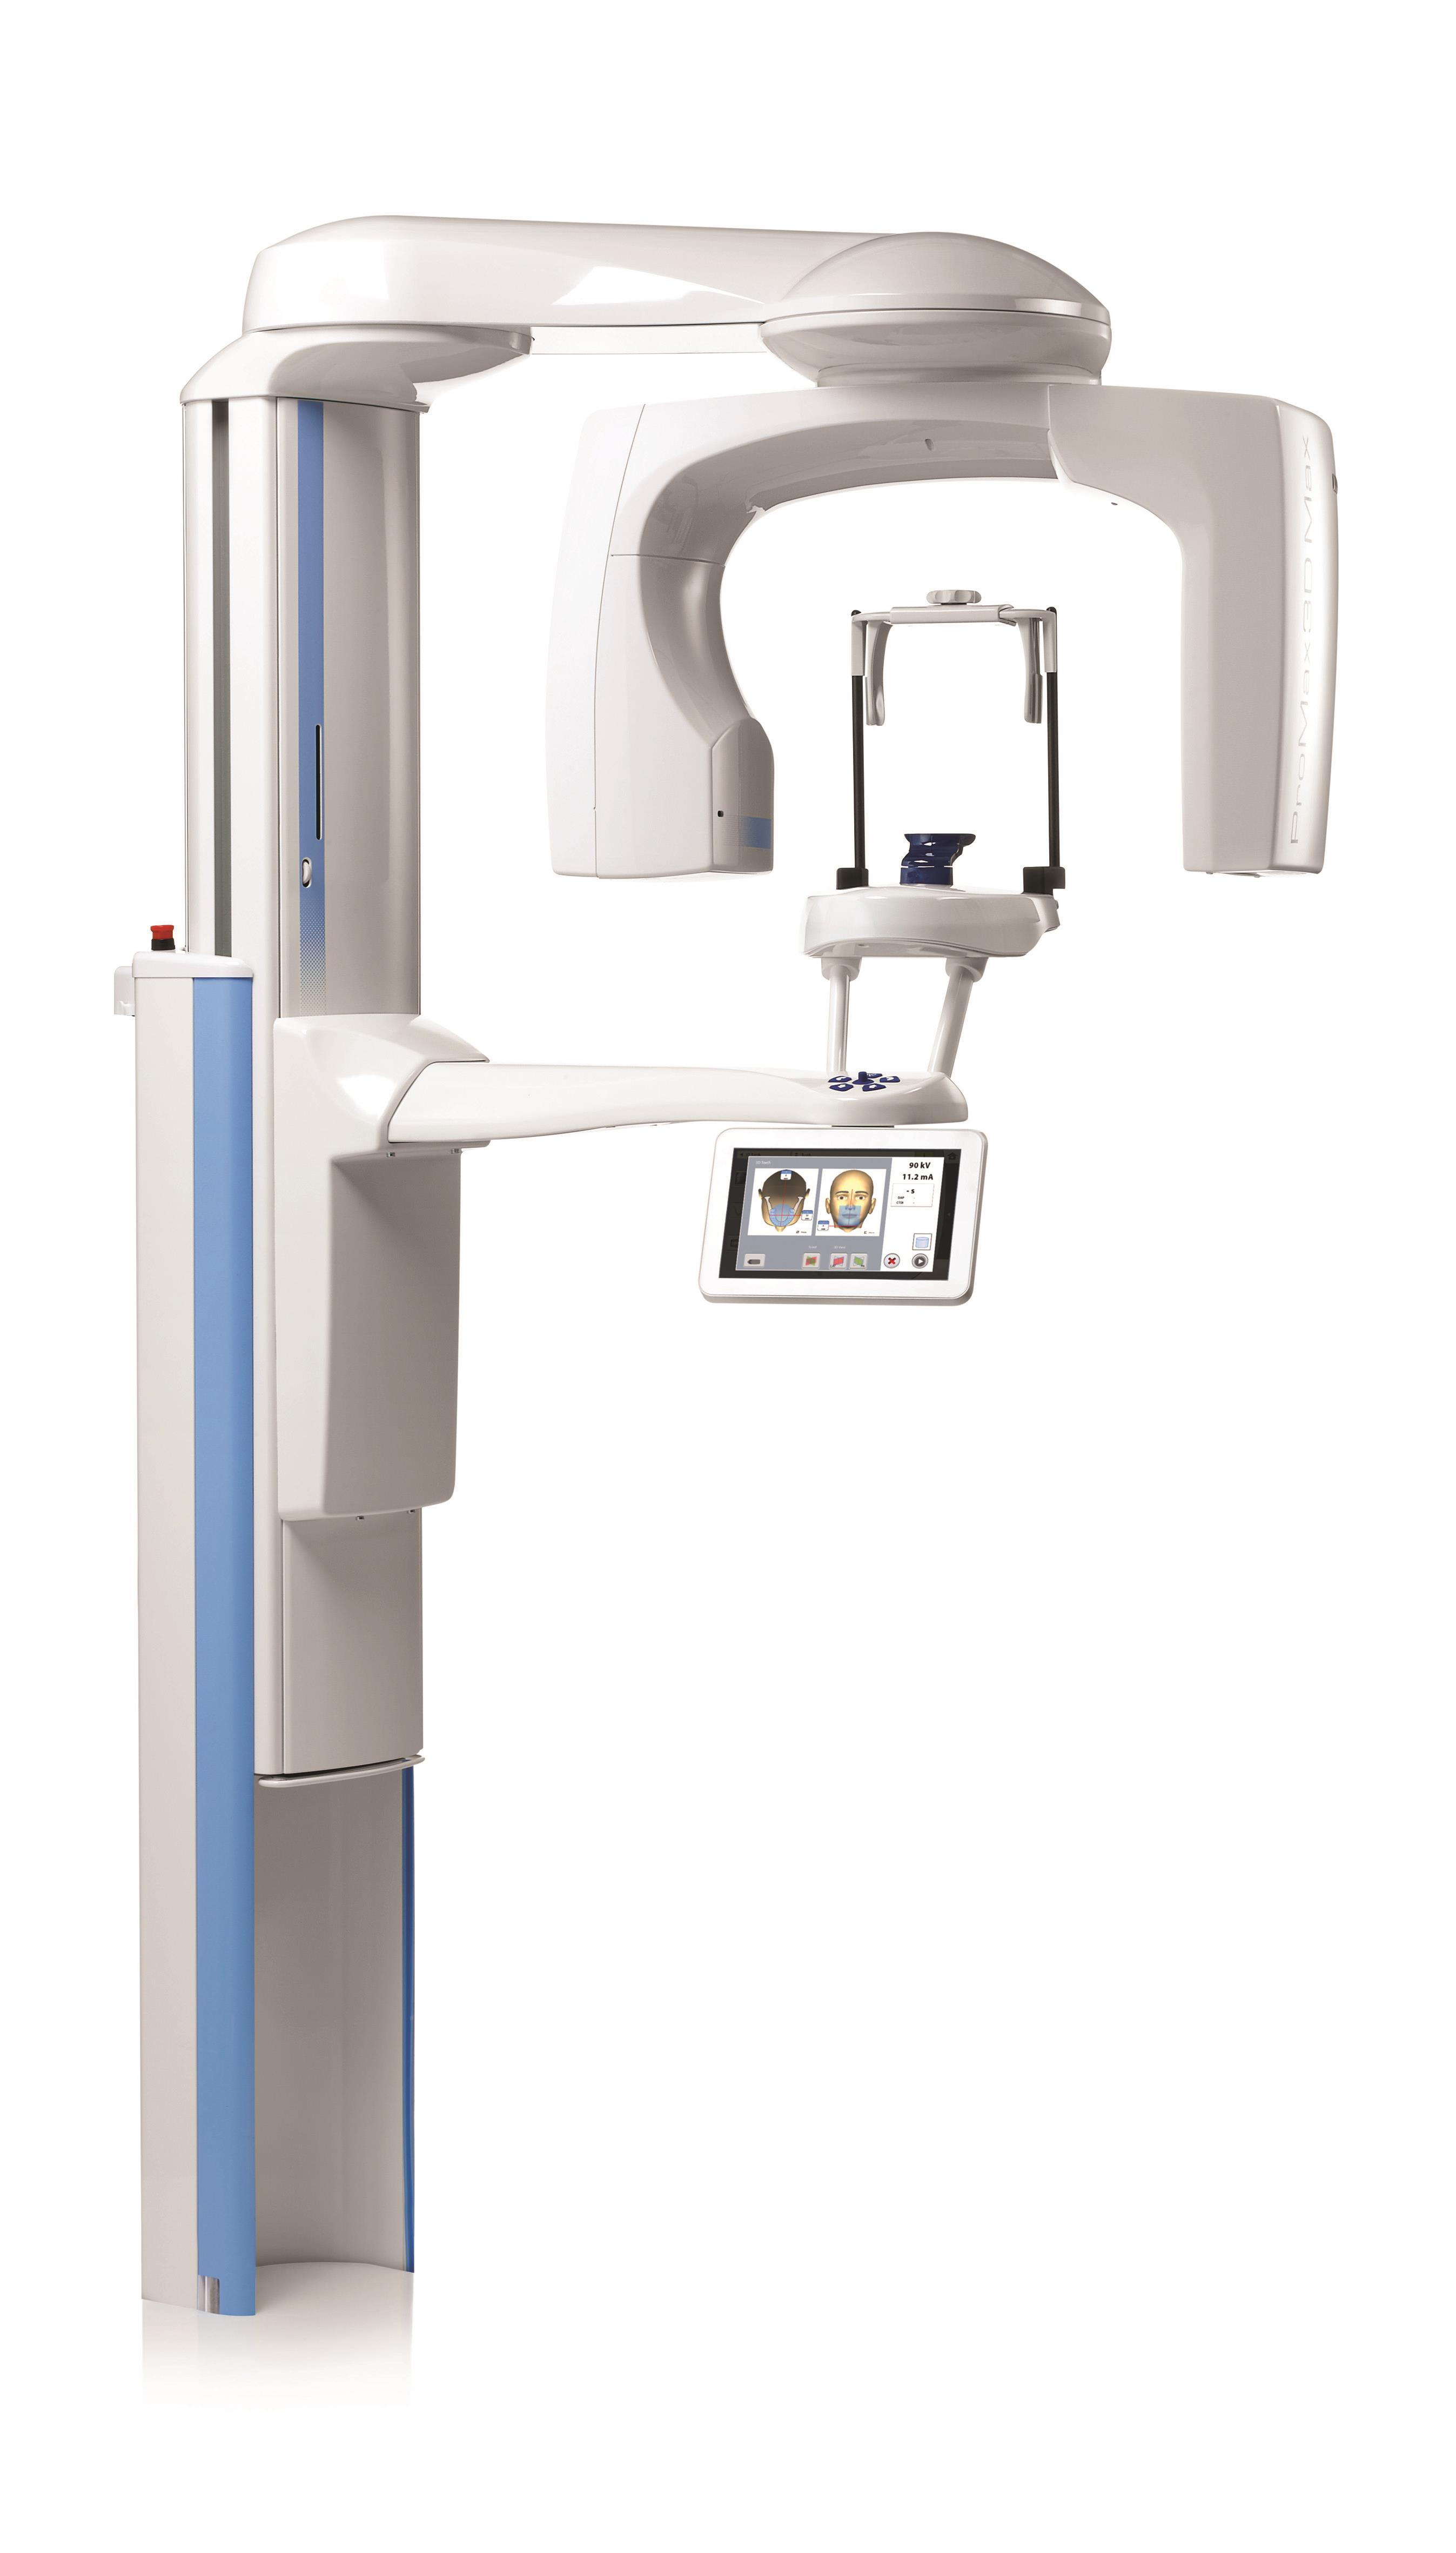 New features and improvements to Planmeca ProMax® 3D X-ray units